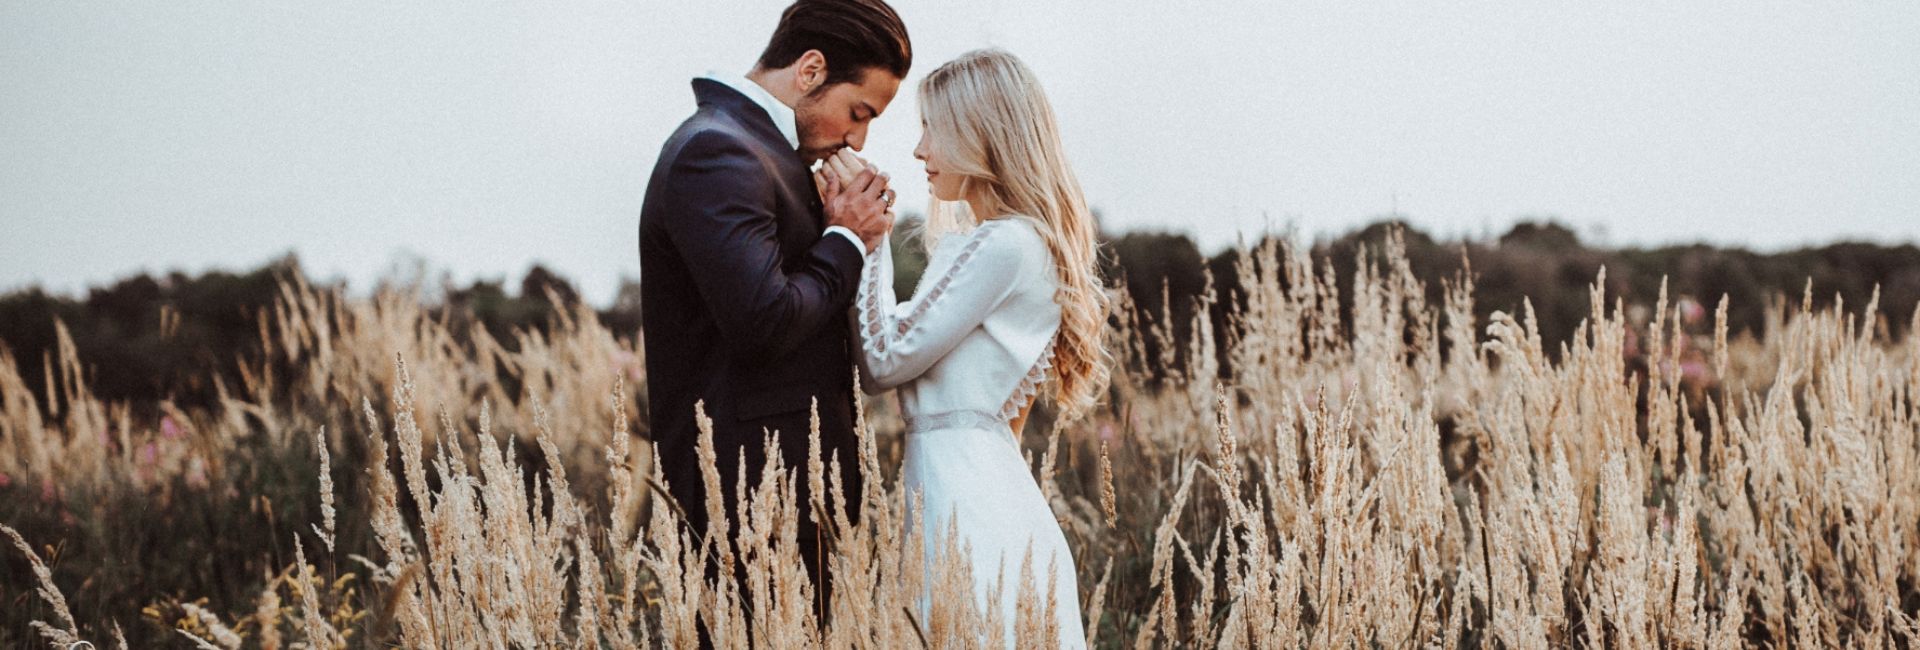 Dream wedding fashion for him and her